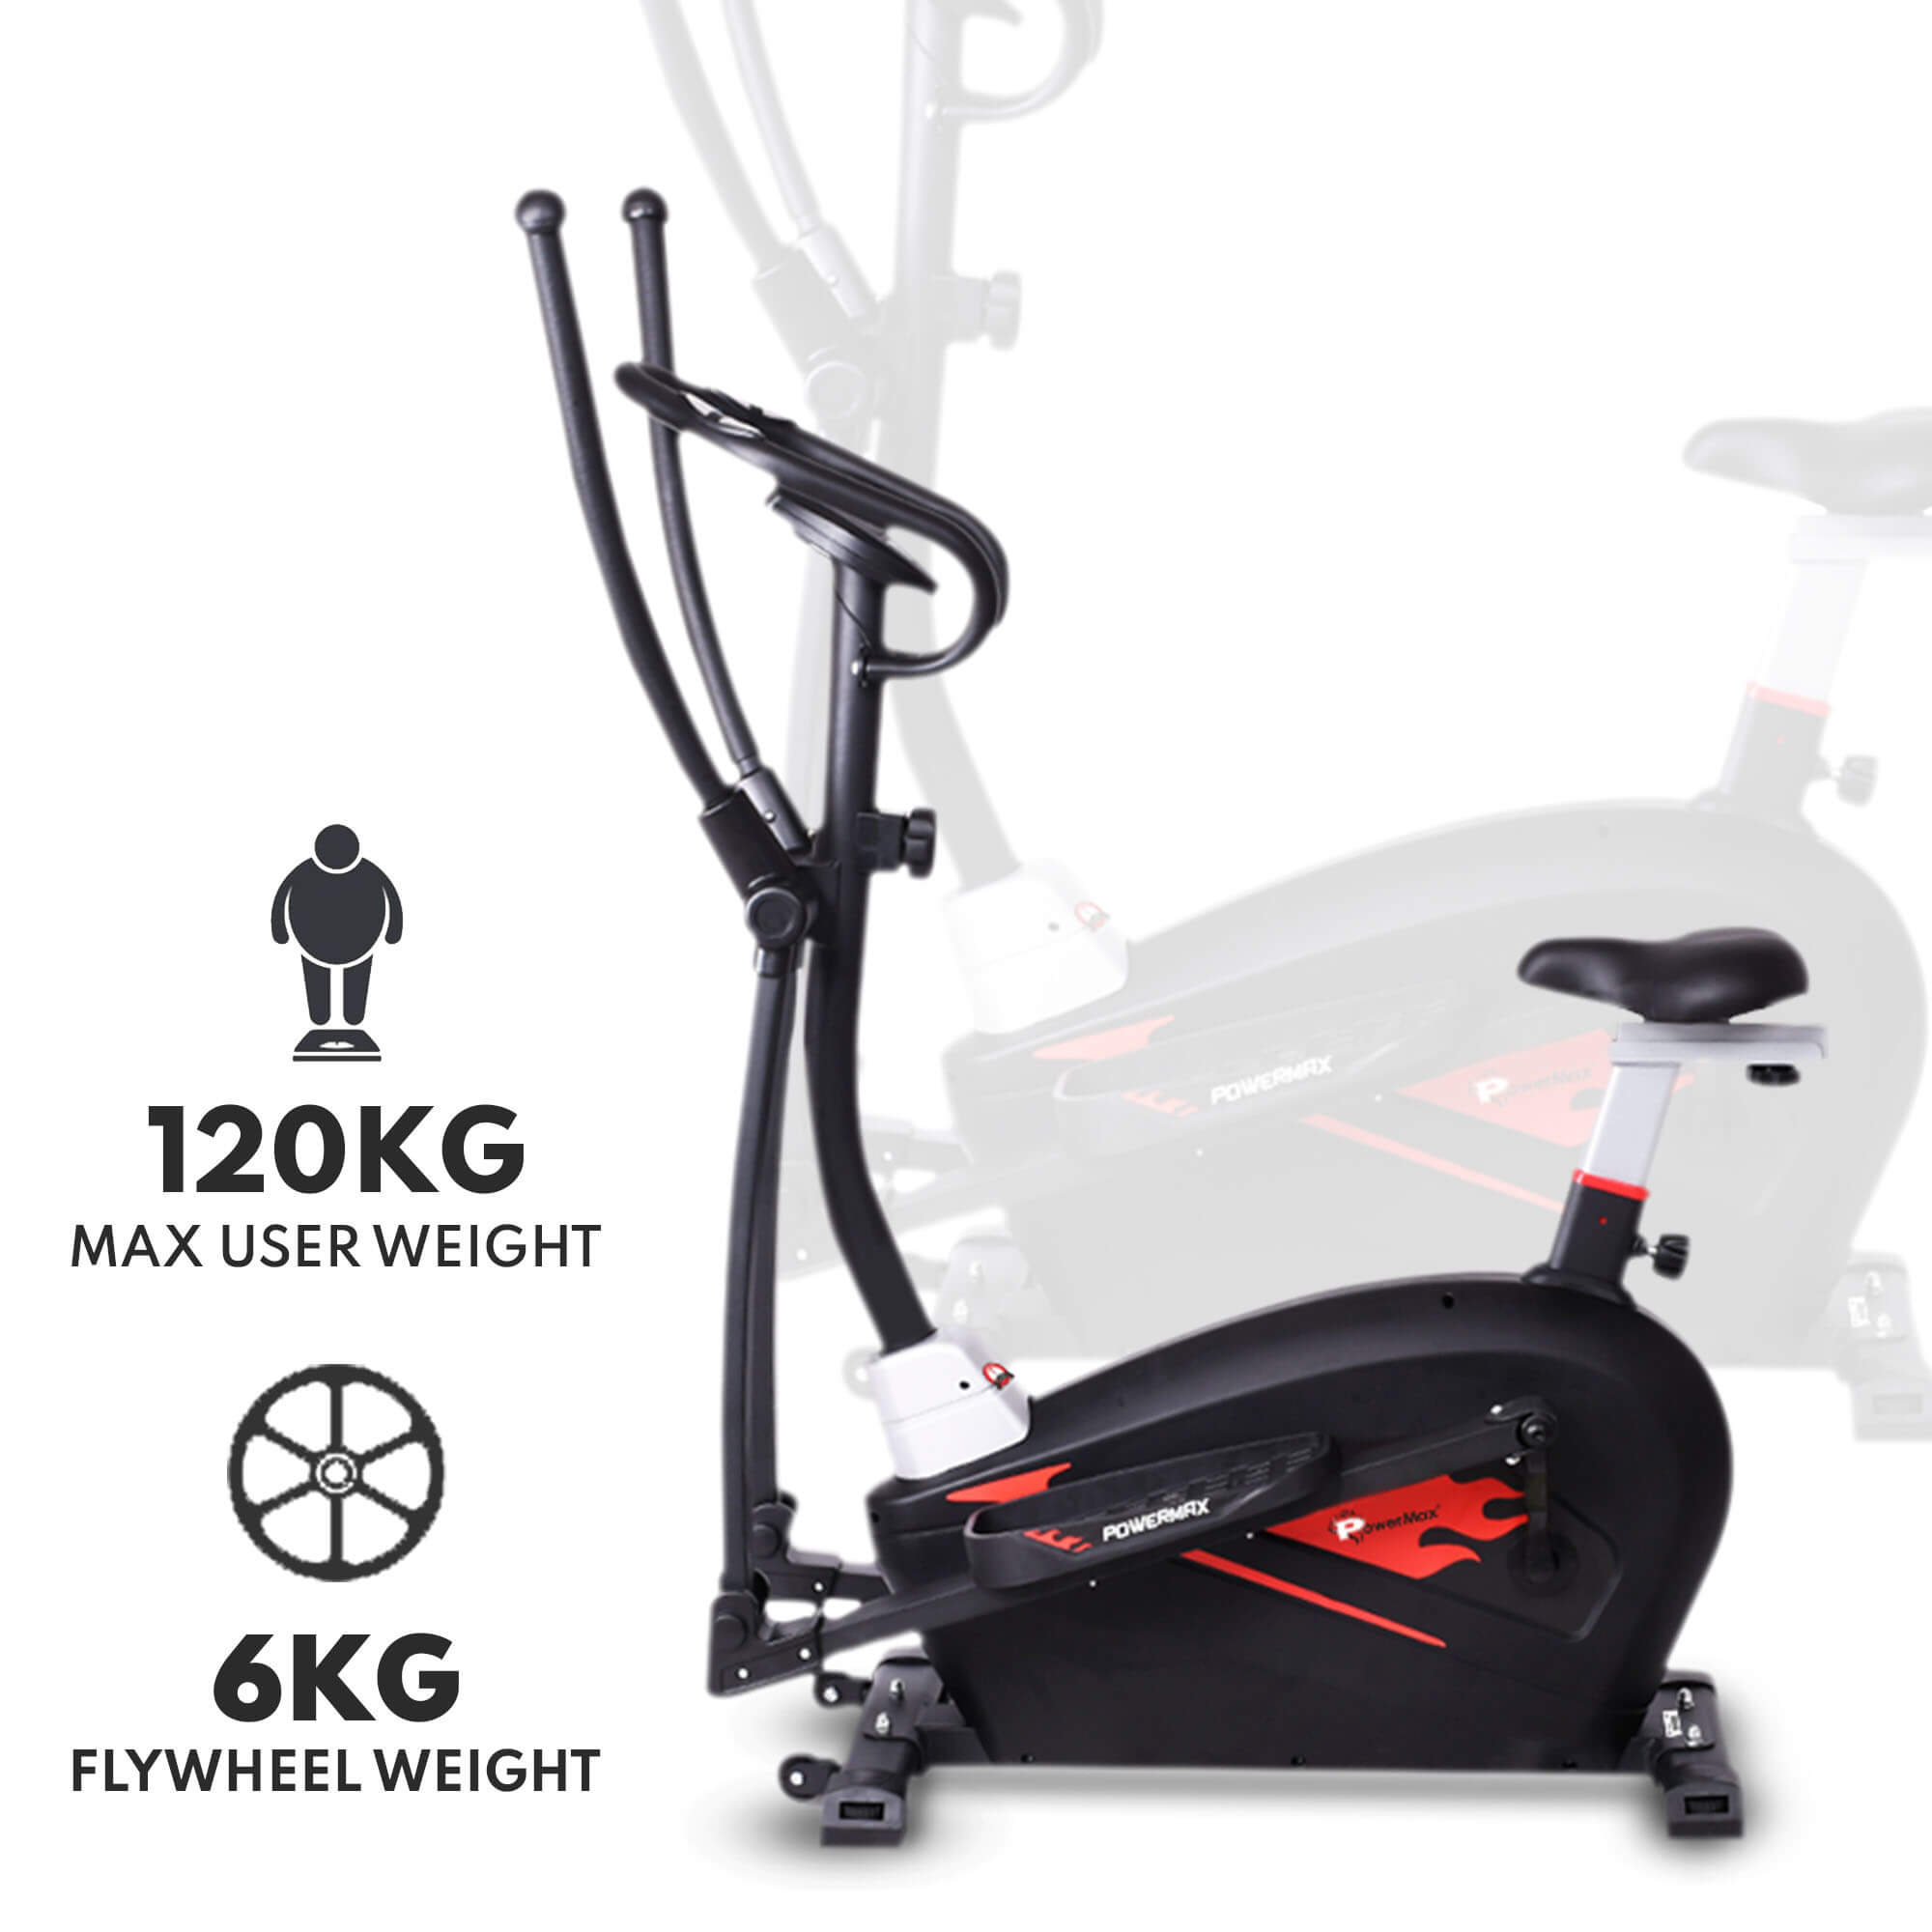 PowerMax Fitness New 2021 EH-350S Magnetic Elliptical Cross Trainer with SOFT Seat